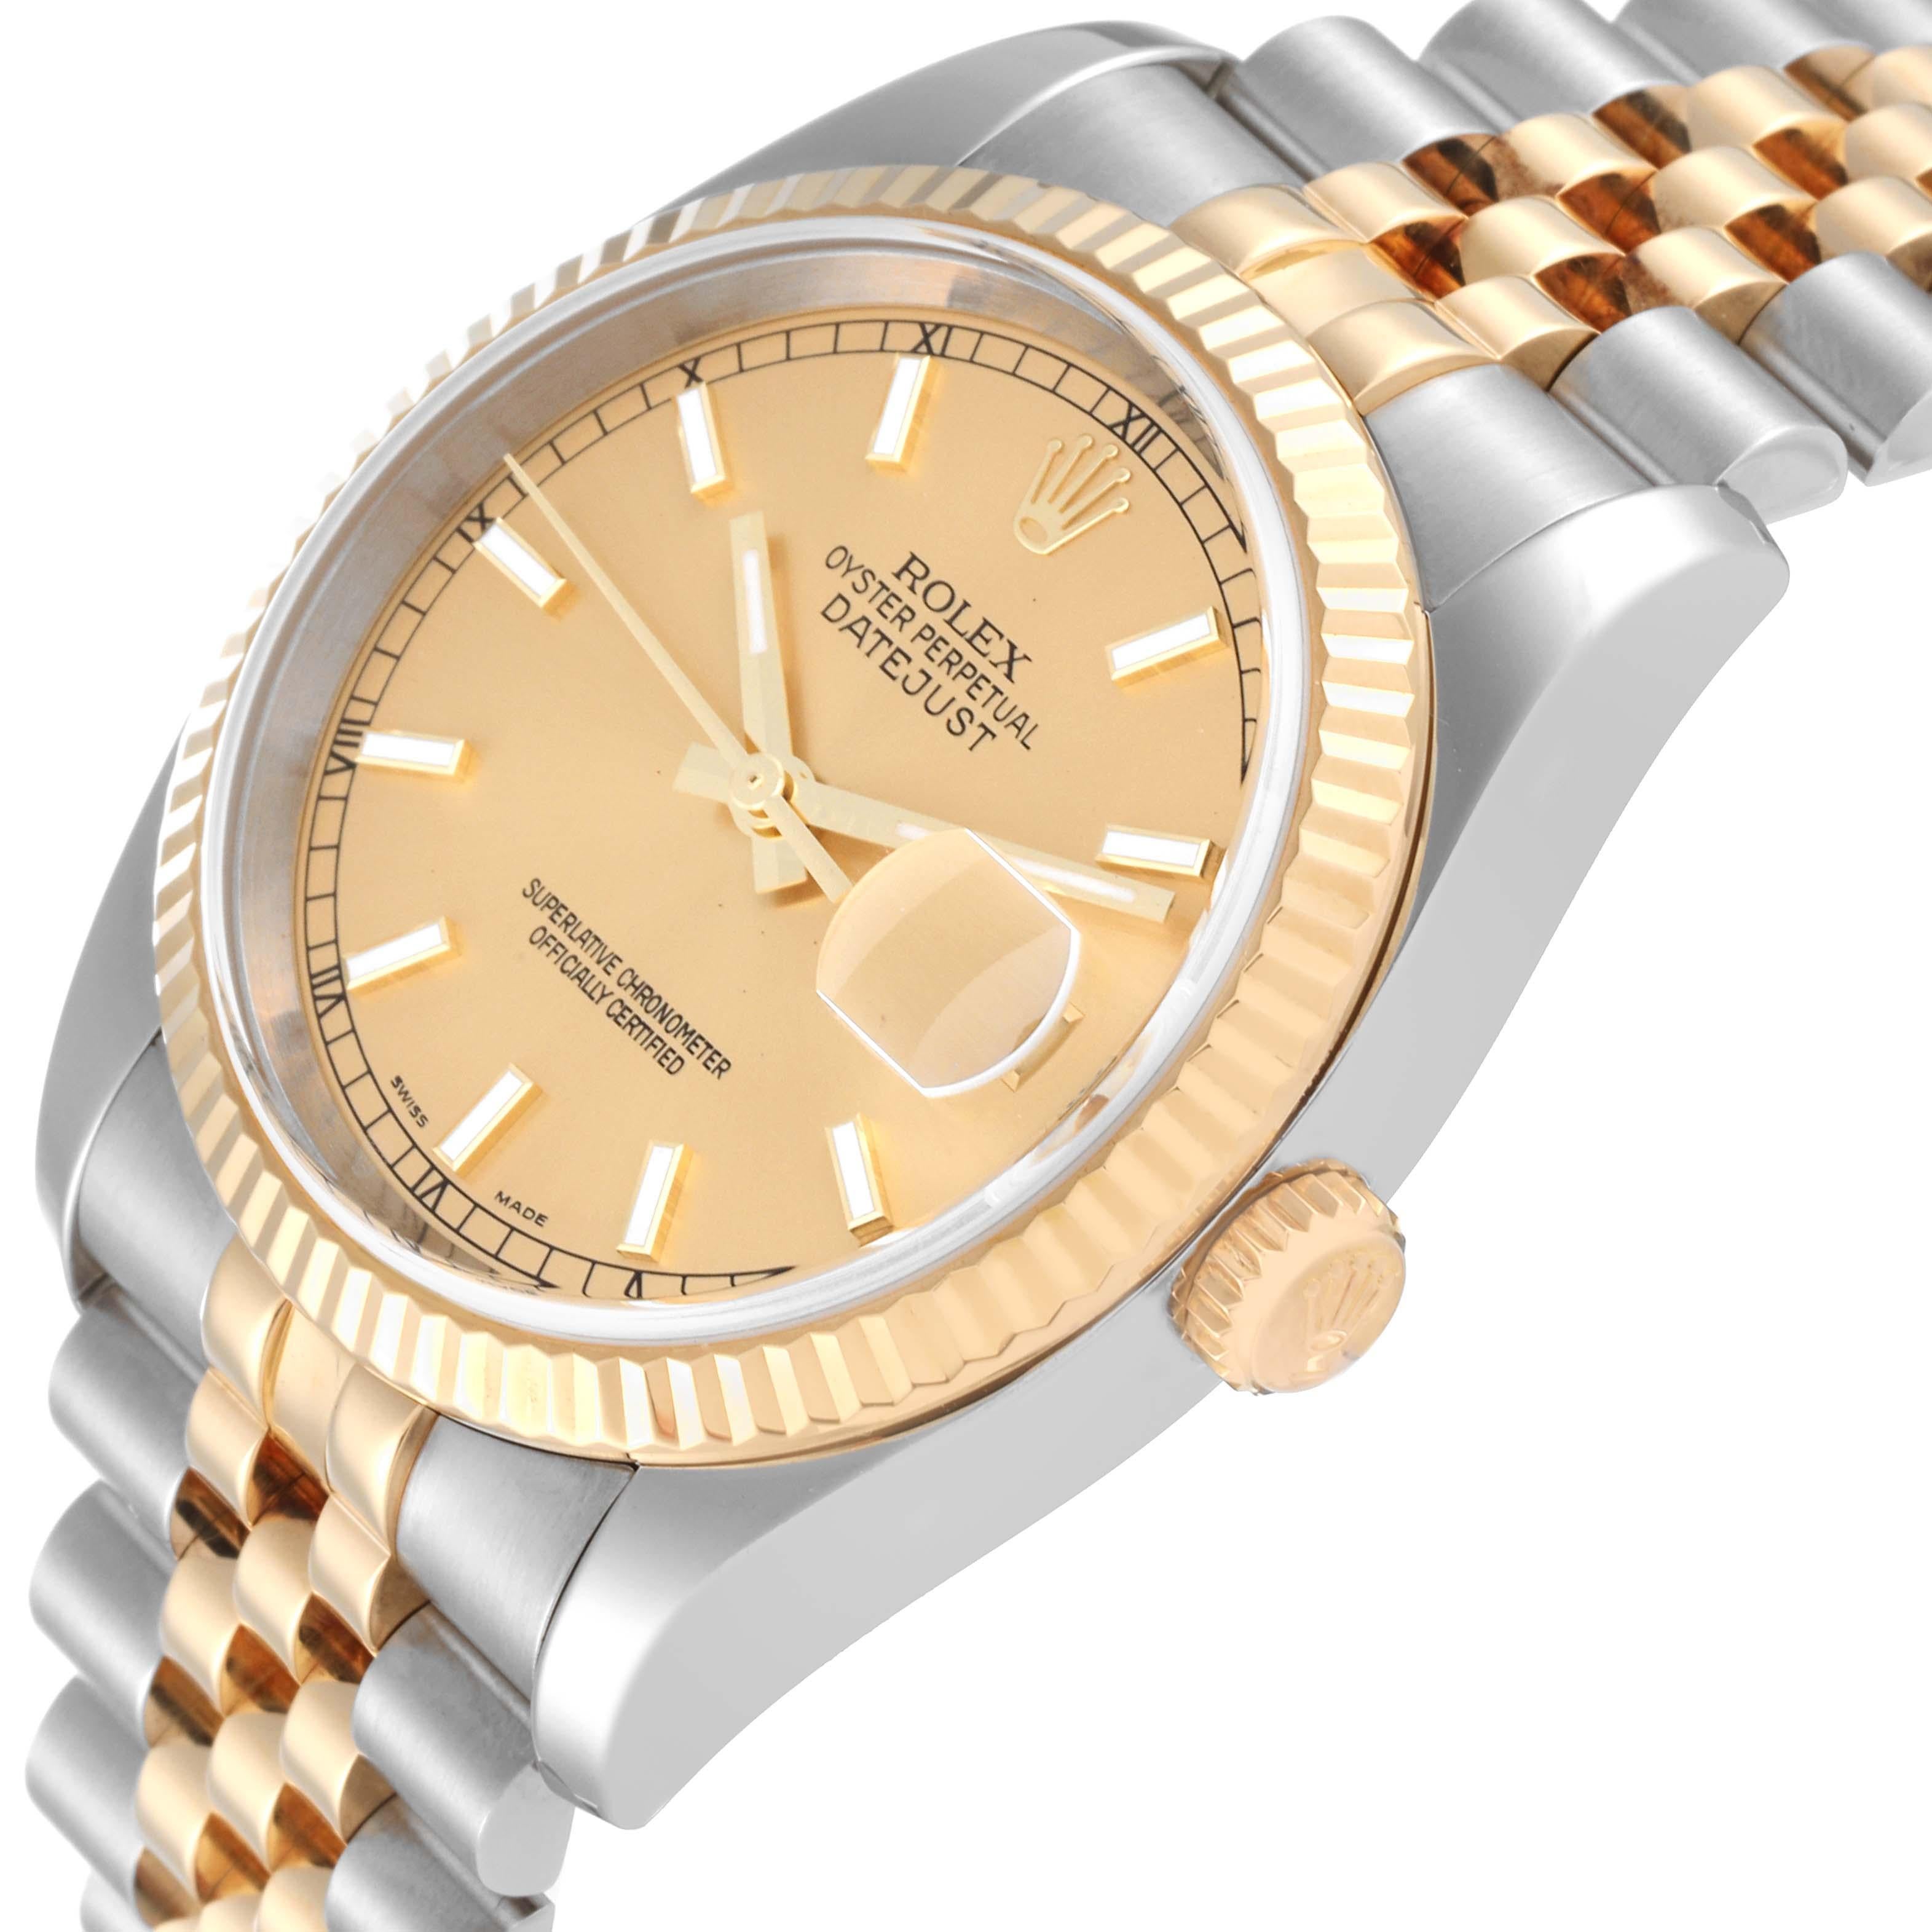 Rolex Datejust Steel Yellow Gold Champagne Dial Mens Watch 116233 Box Papers 1